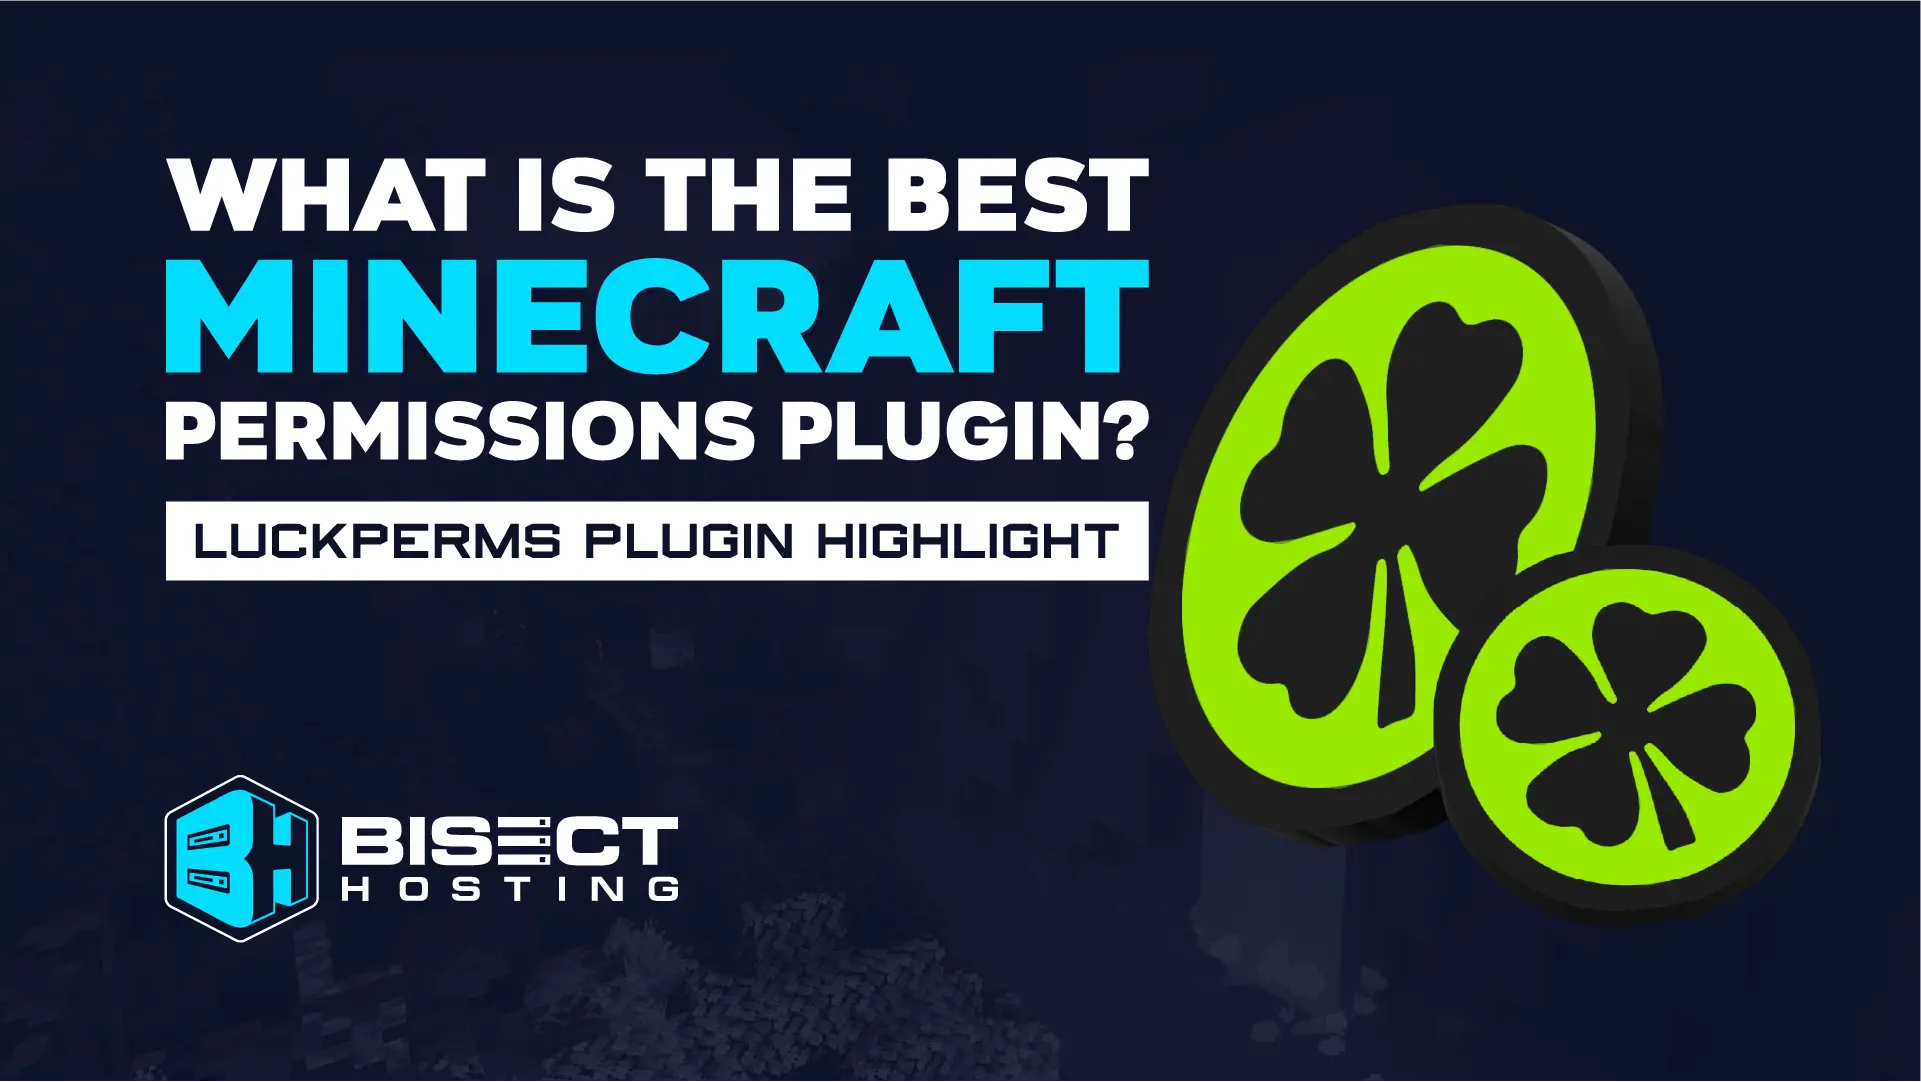 What Is the Best Minecraft Permissions Plugin?